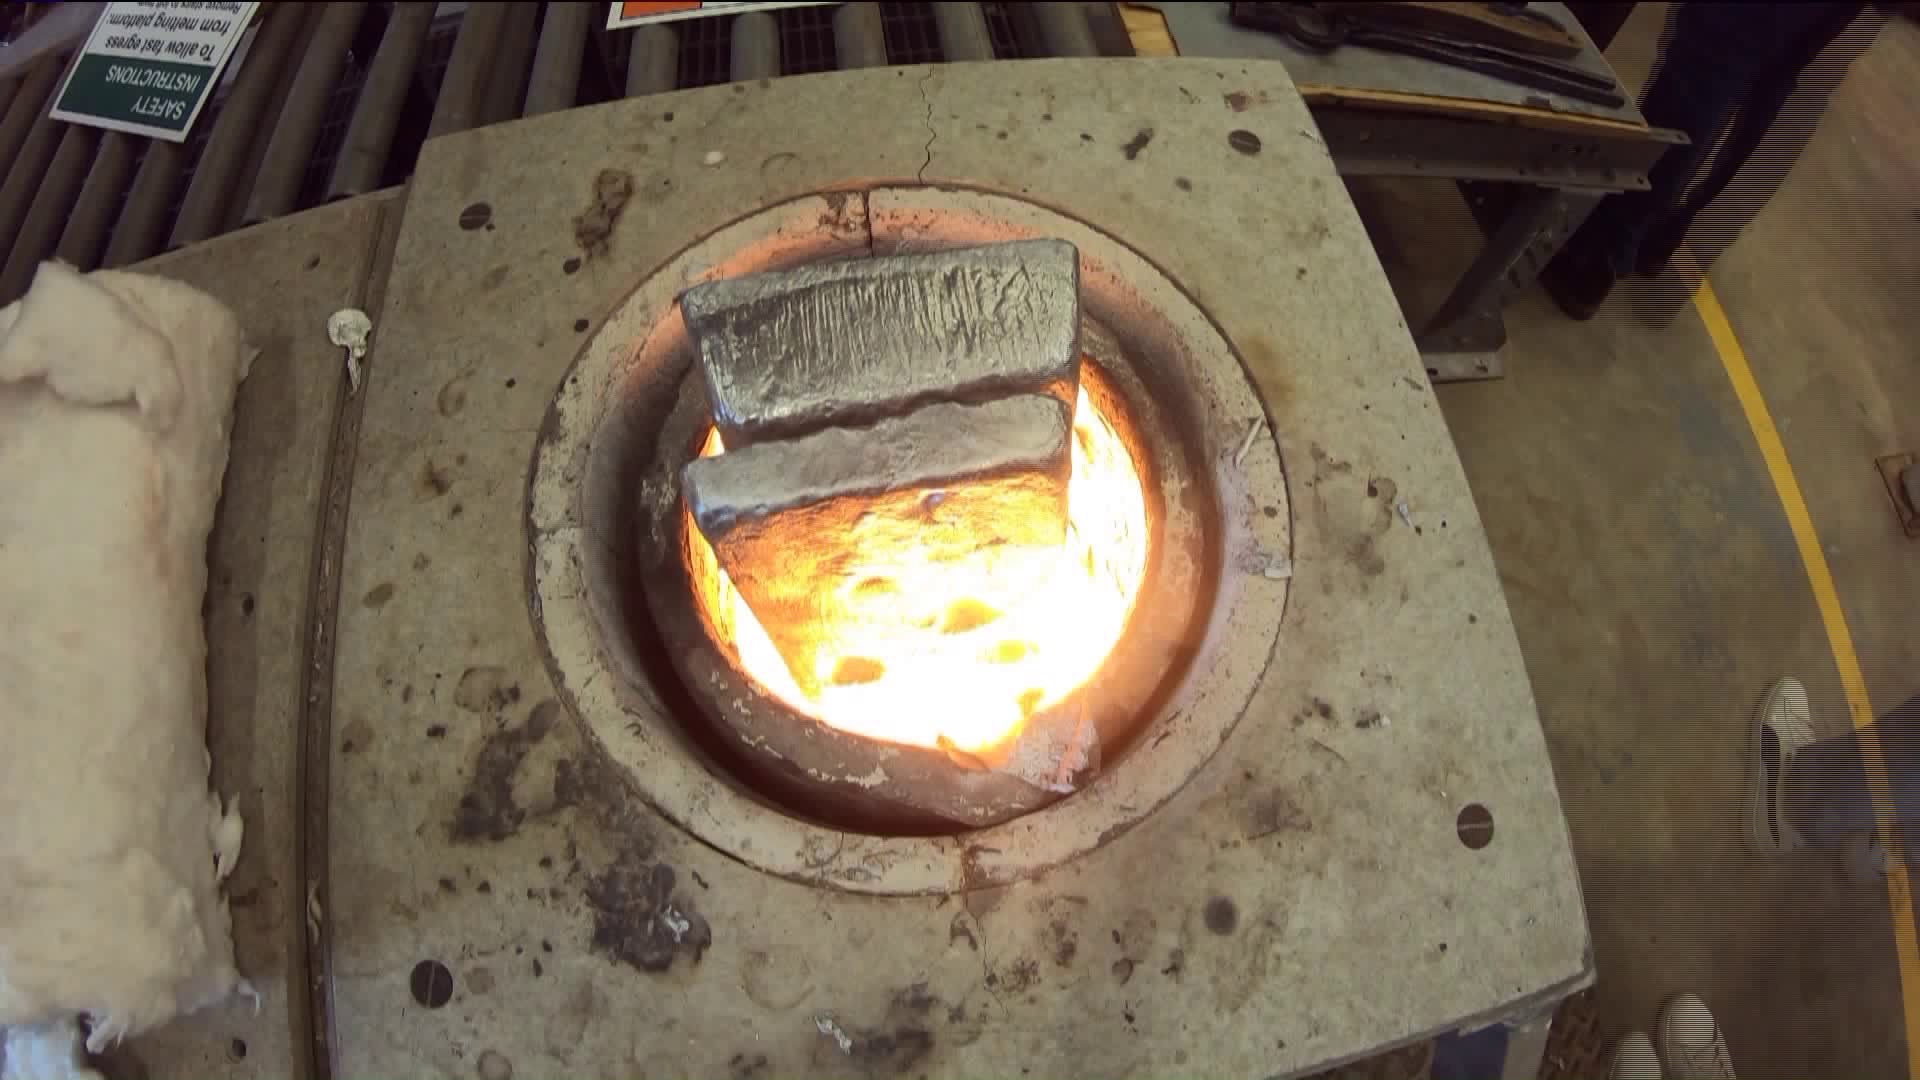 Forged in Fire; UConn students start metal working club